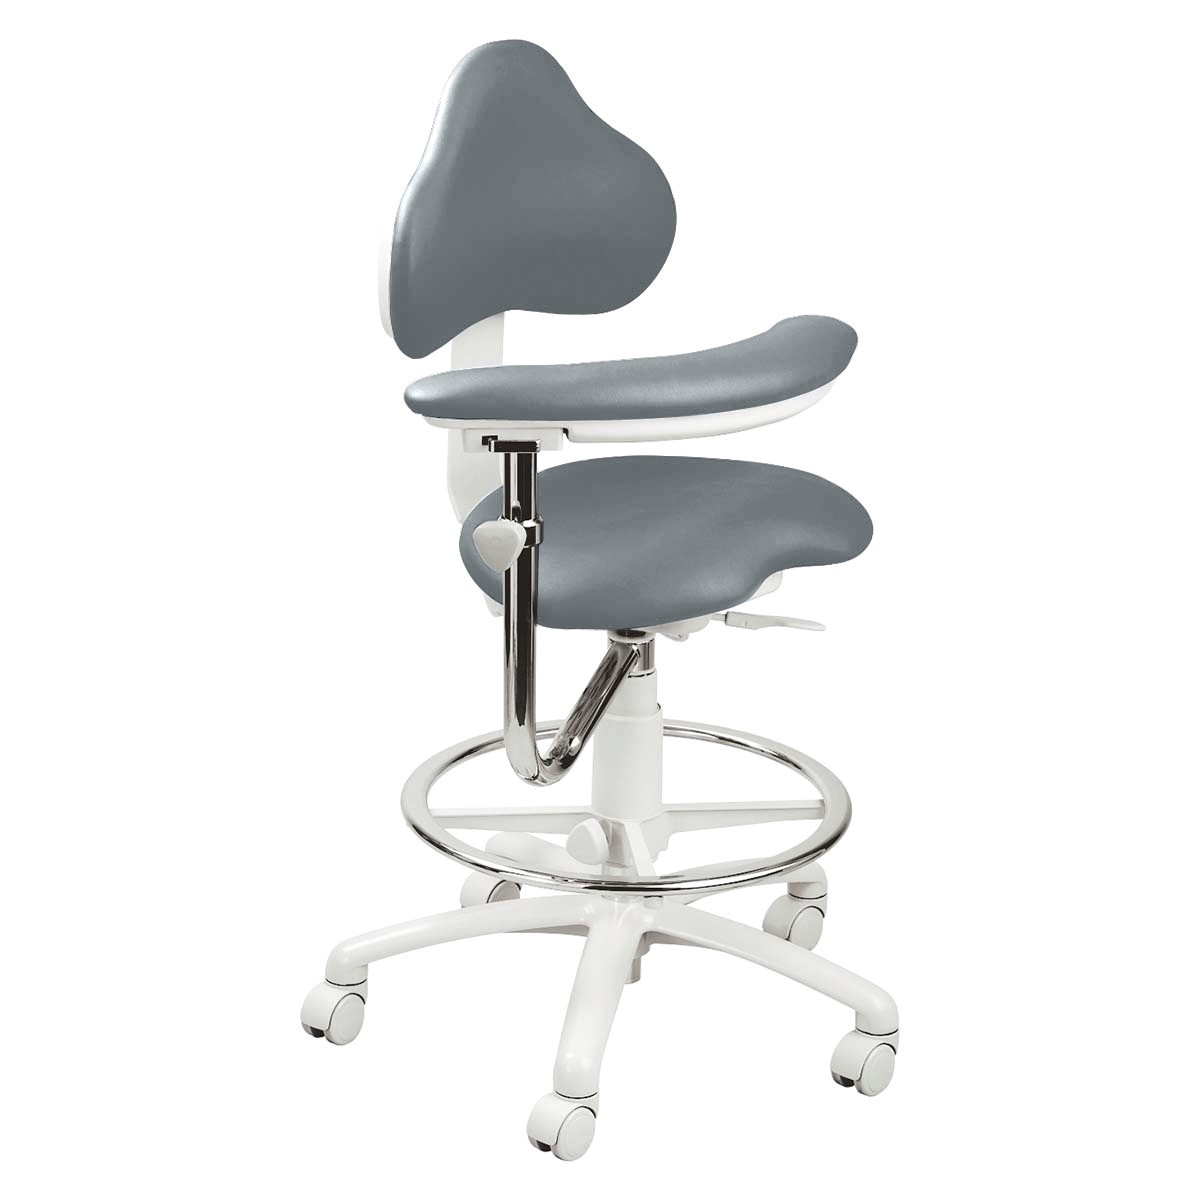 9120BR Dental Assistant Stool with Right Support in dove gray